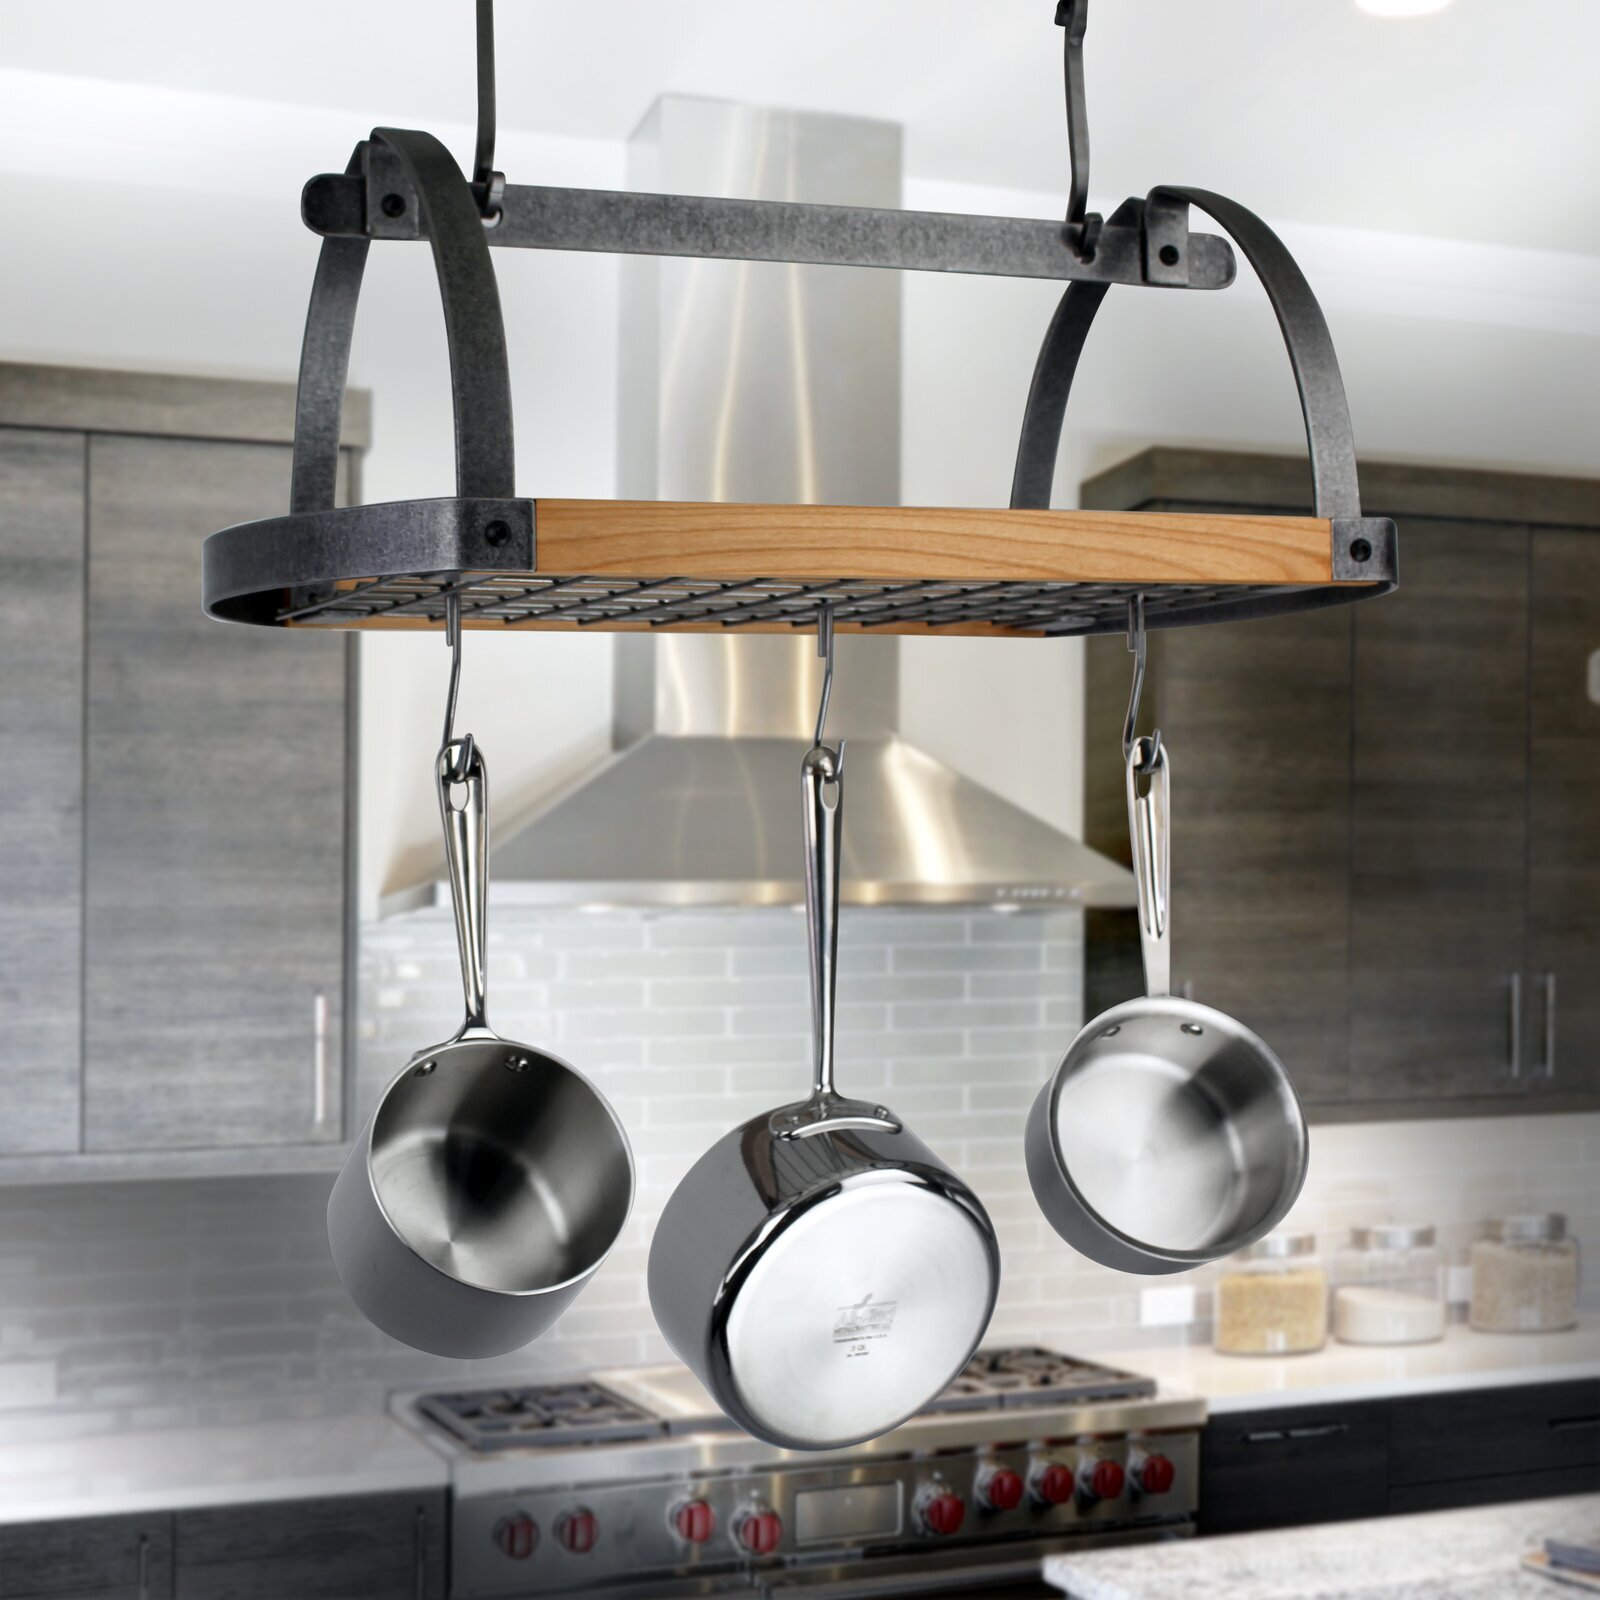 Handcrafted Wood and Wrought Steel Pot Hanging Rack